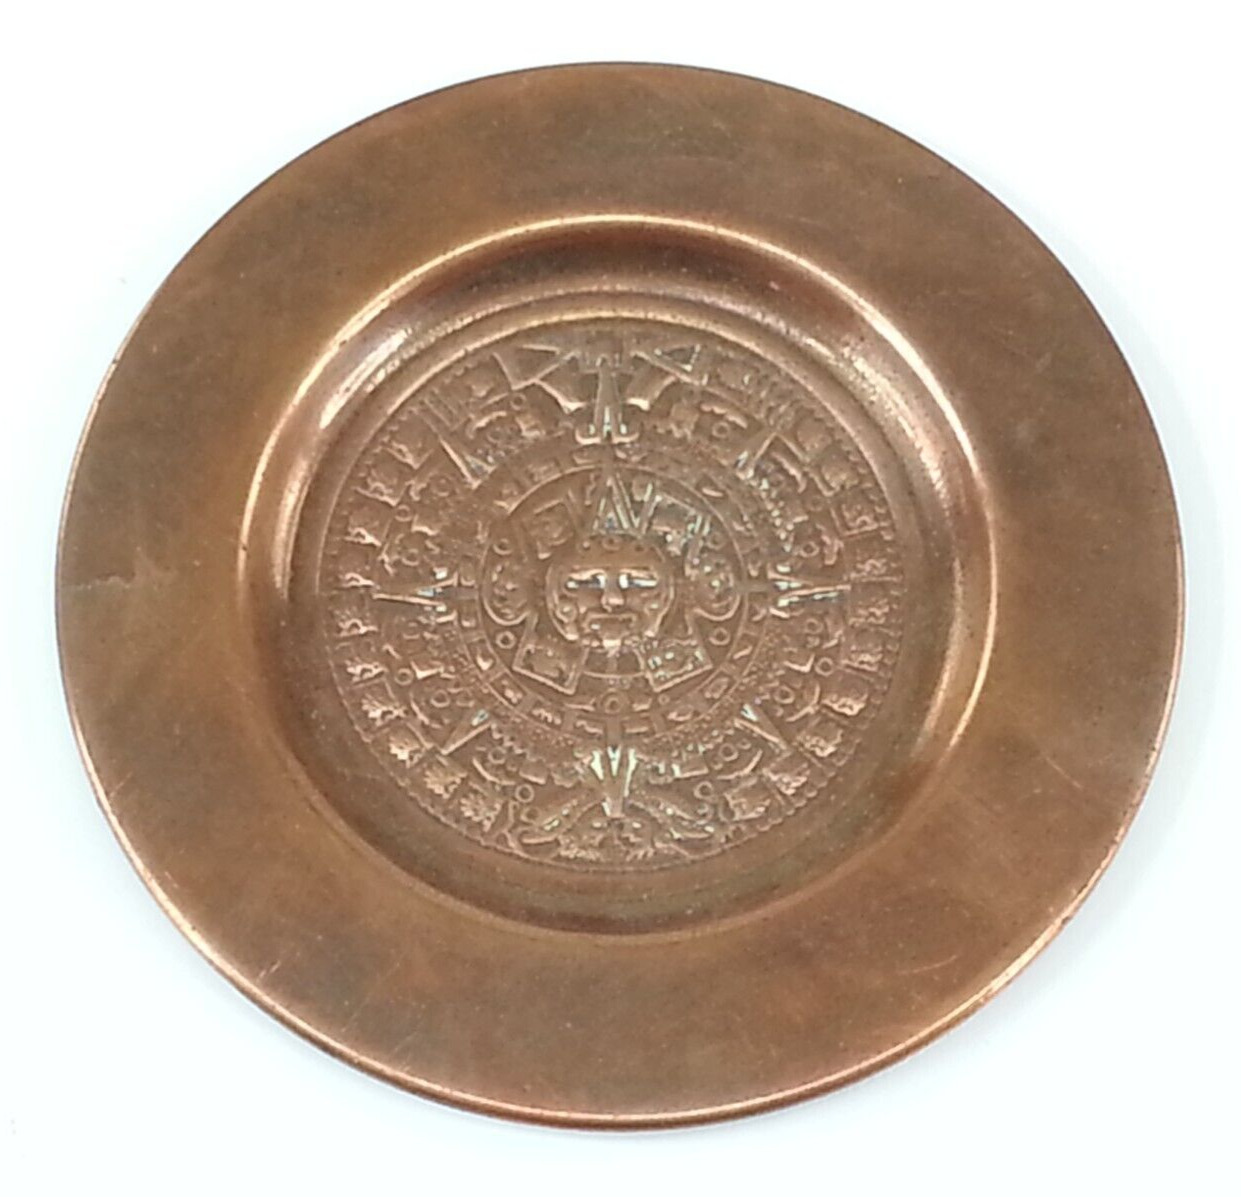 Vintage Copper Miniature 4 in Trinket Charger Aztec Mayan Calendar South America